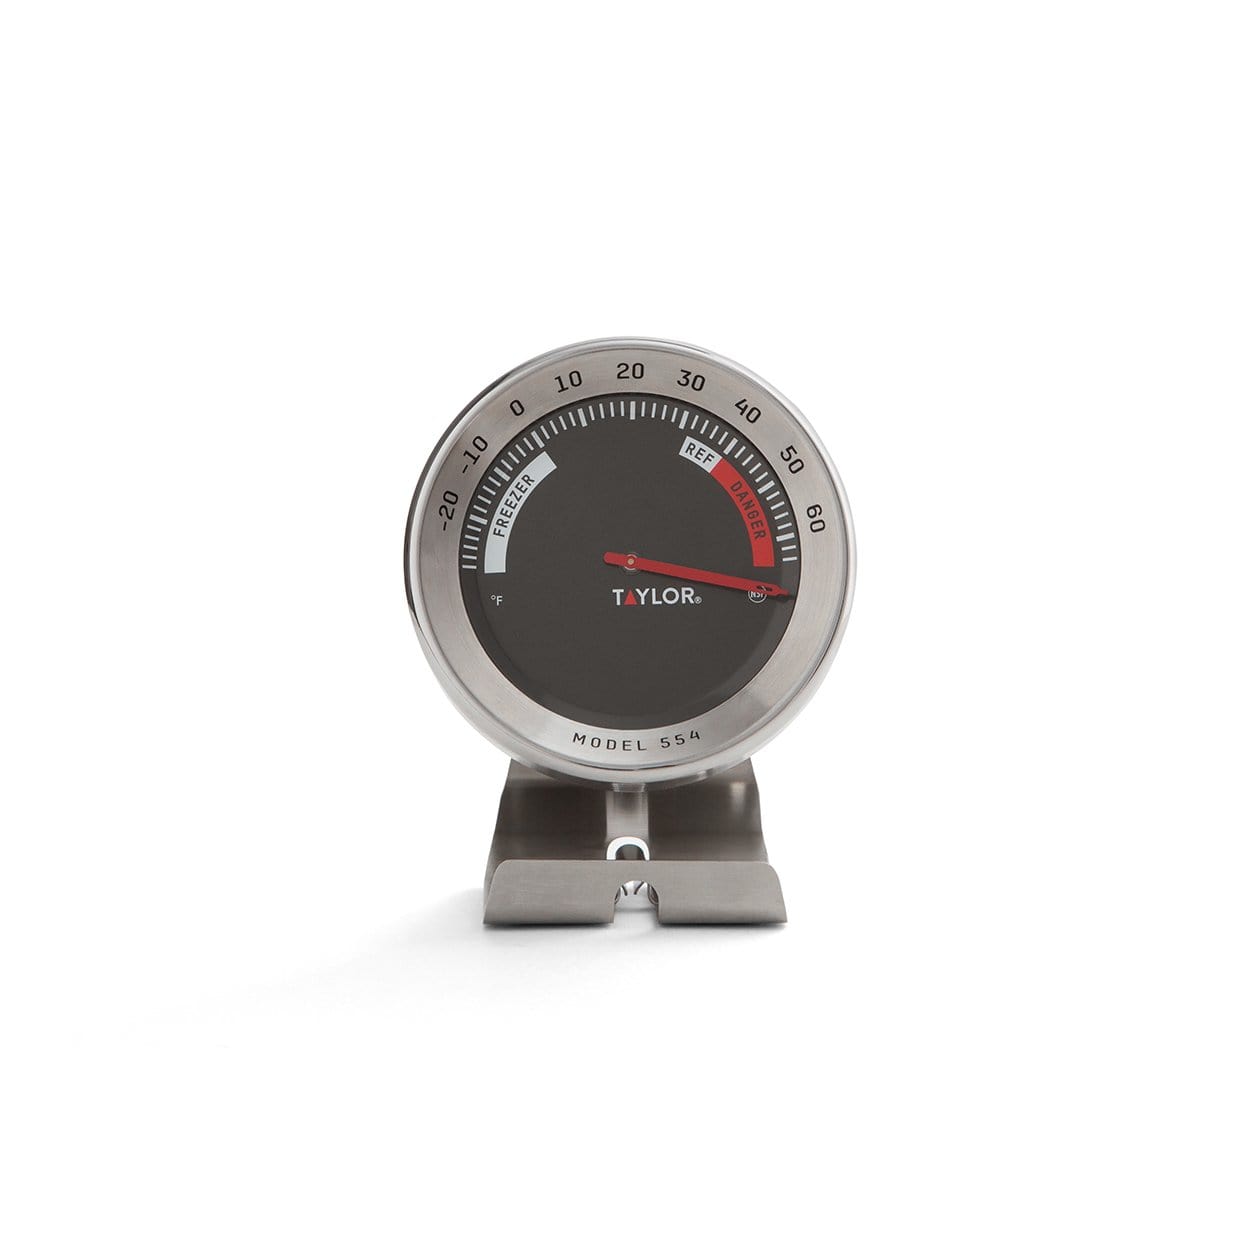 Refrigerator Thermometer, Two Pack Fridge Thermometer Stainless